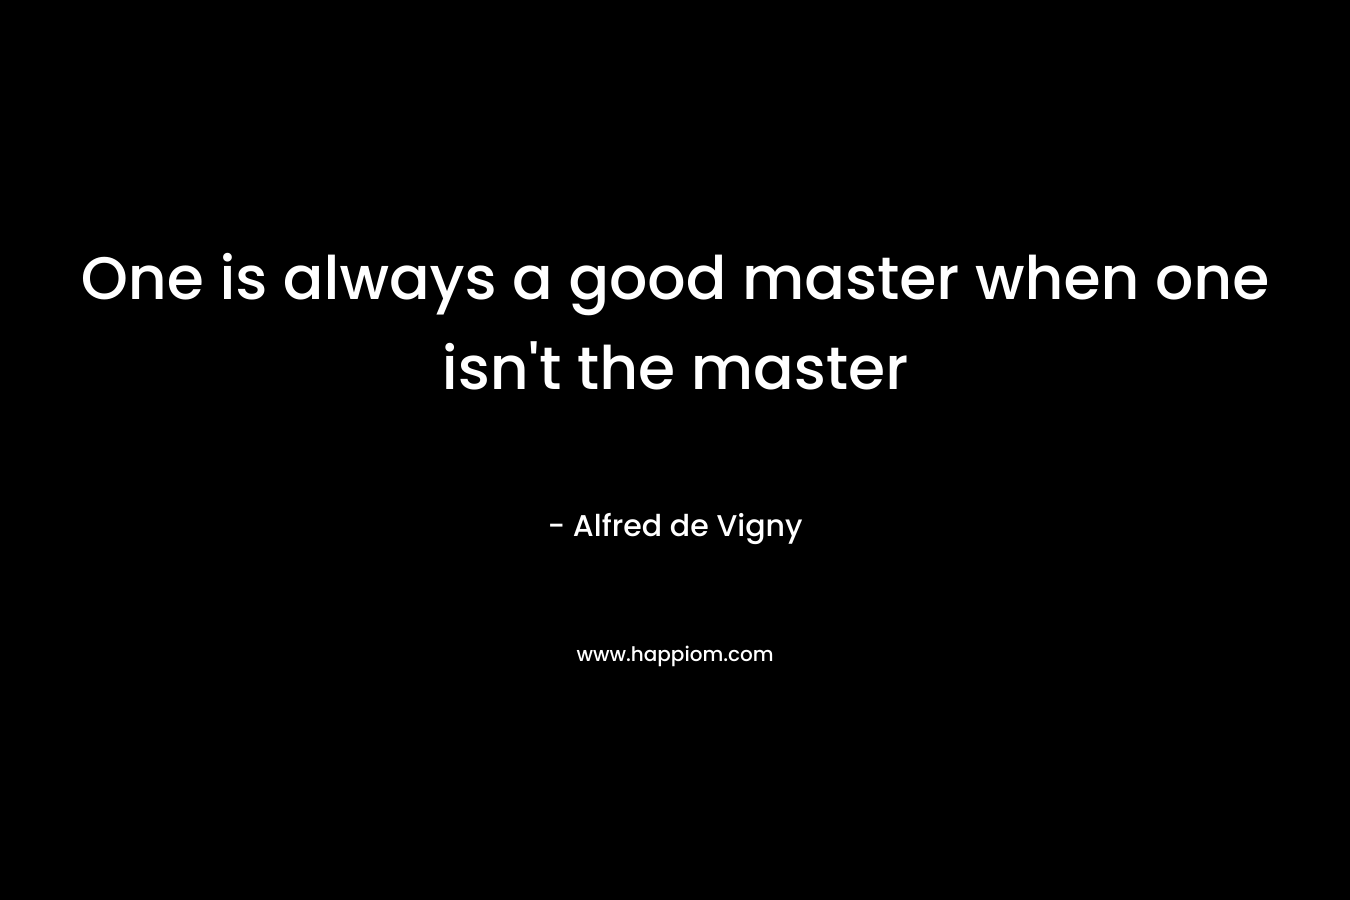 One is always a good master when one isn't the master